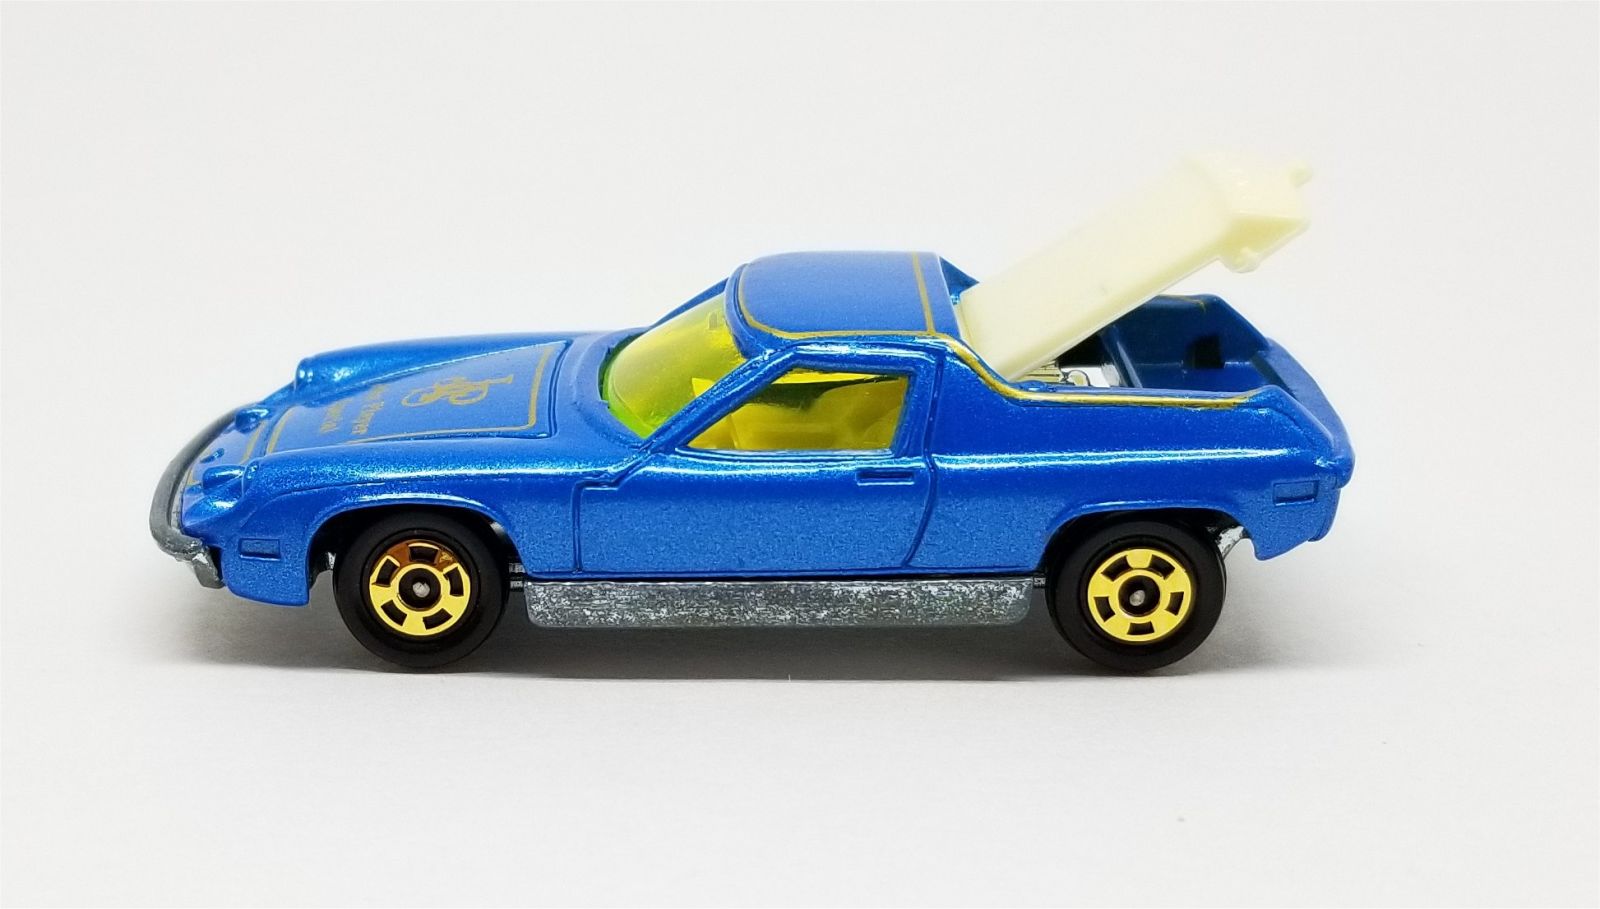 Illustration for article titled [REVIEW] Tomica Lotus Europa Special